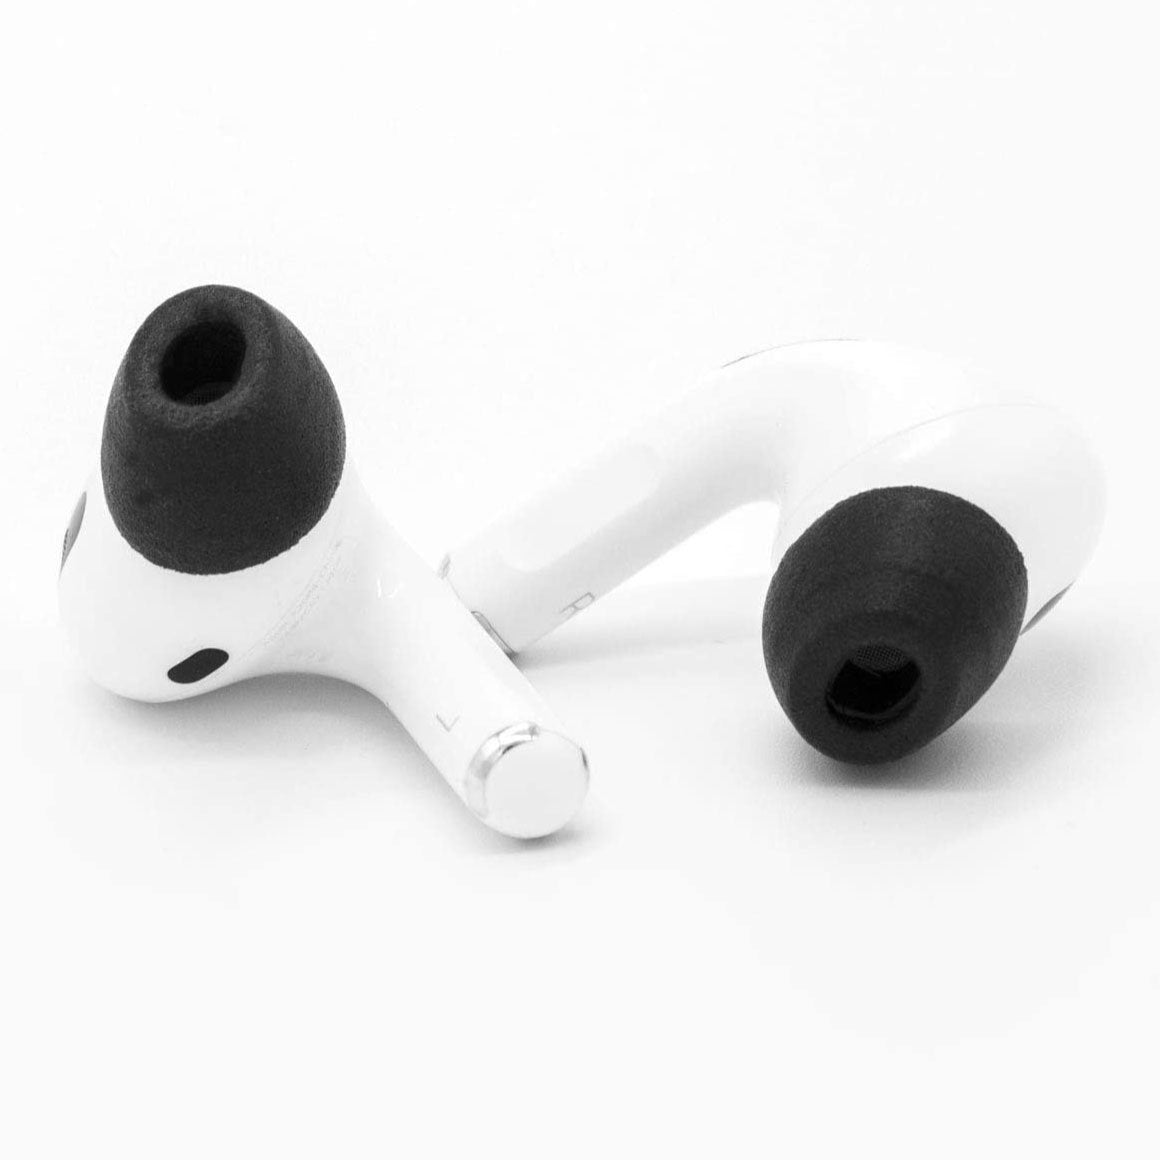 Foam Tips For AirPods Pro